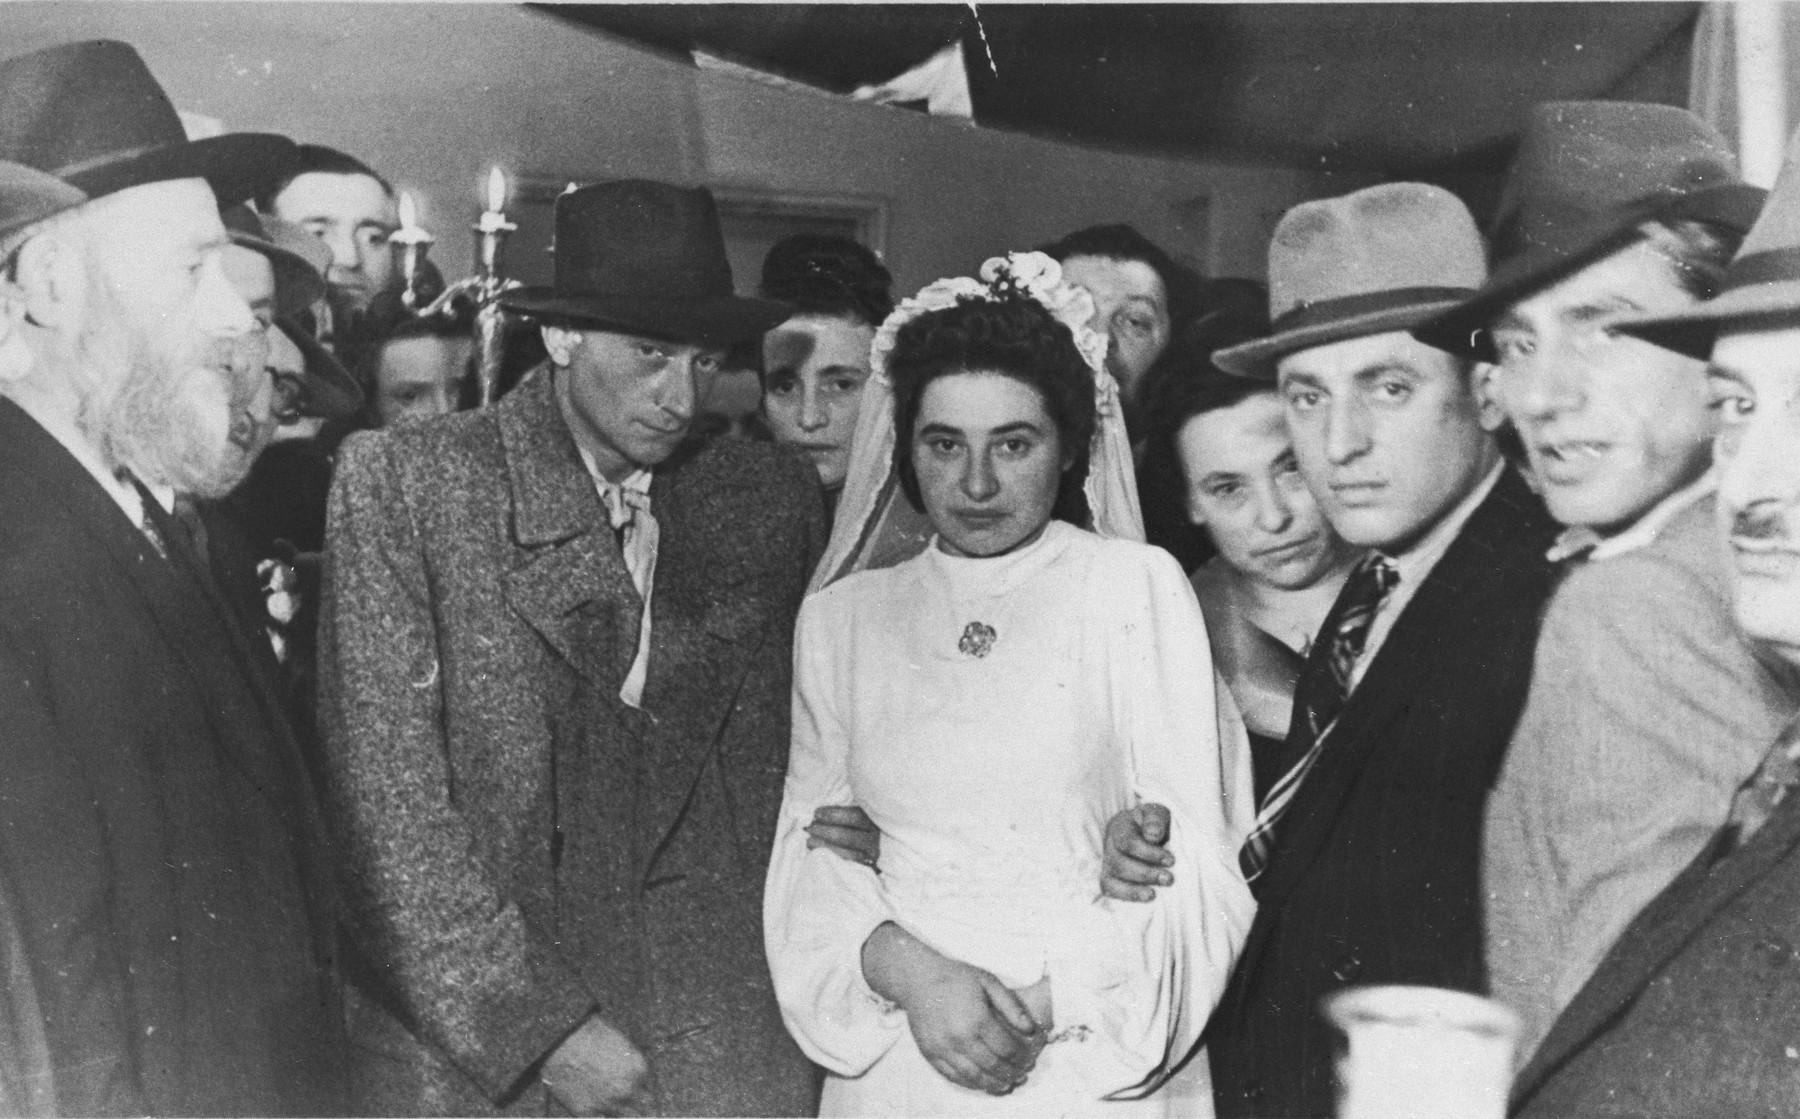 Jewish DPs are wed in a ceremony in Heidelberg, Germany.

Pictured are the bride and groom, Toby and Bernard Weitschner.  Standing next to them on the right are Chava and Izak Lachter.